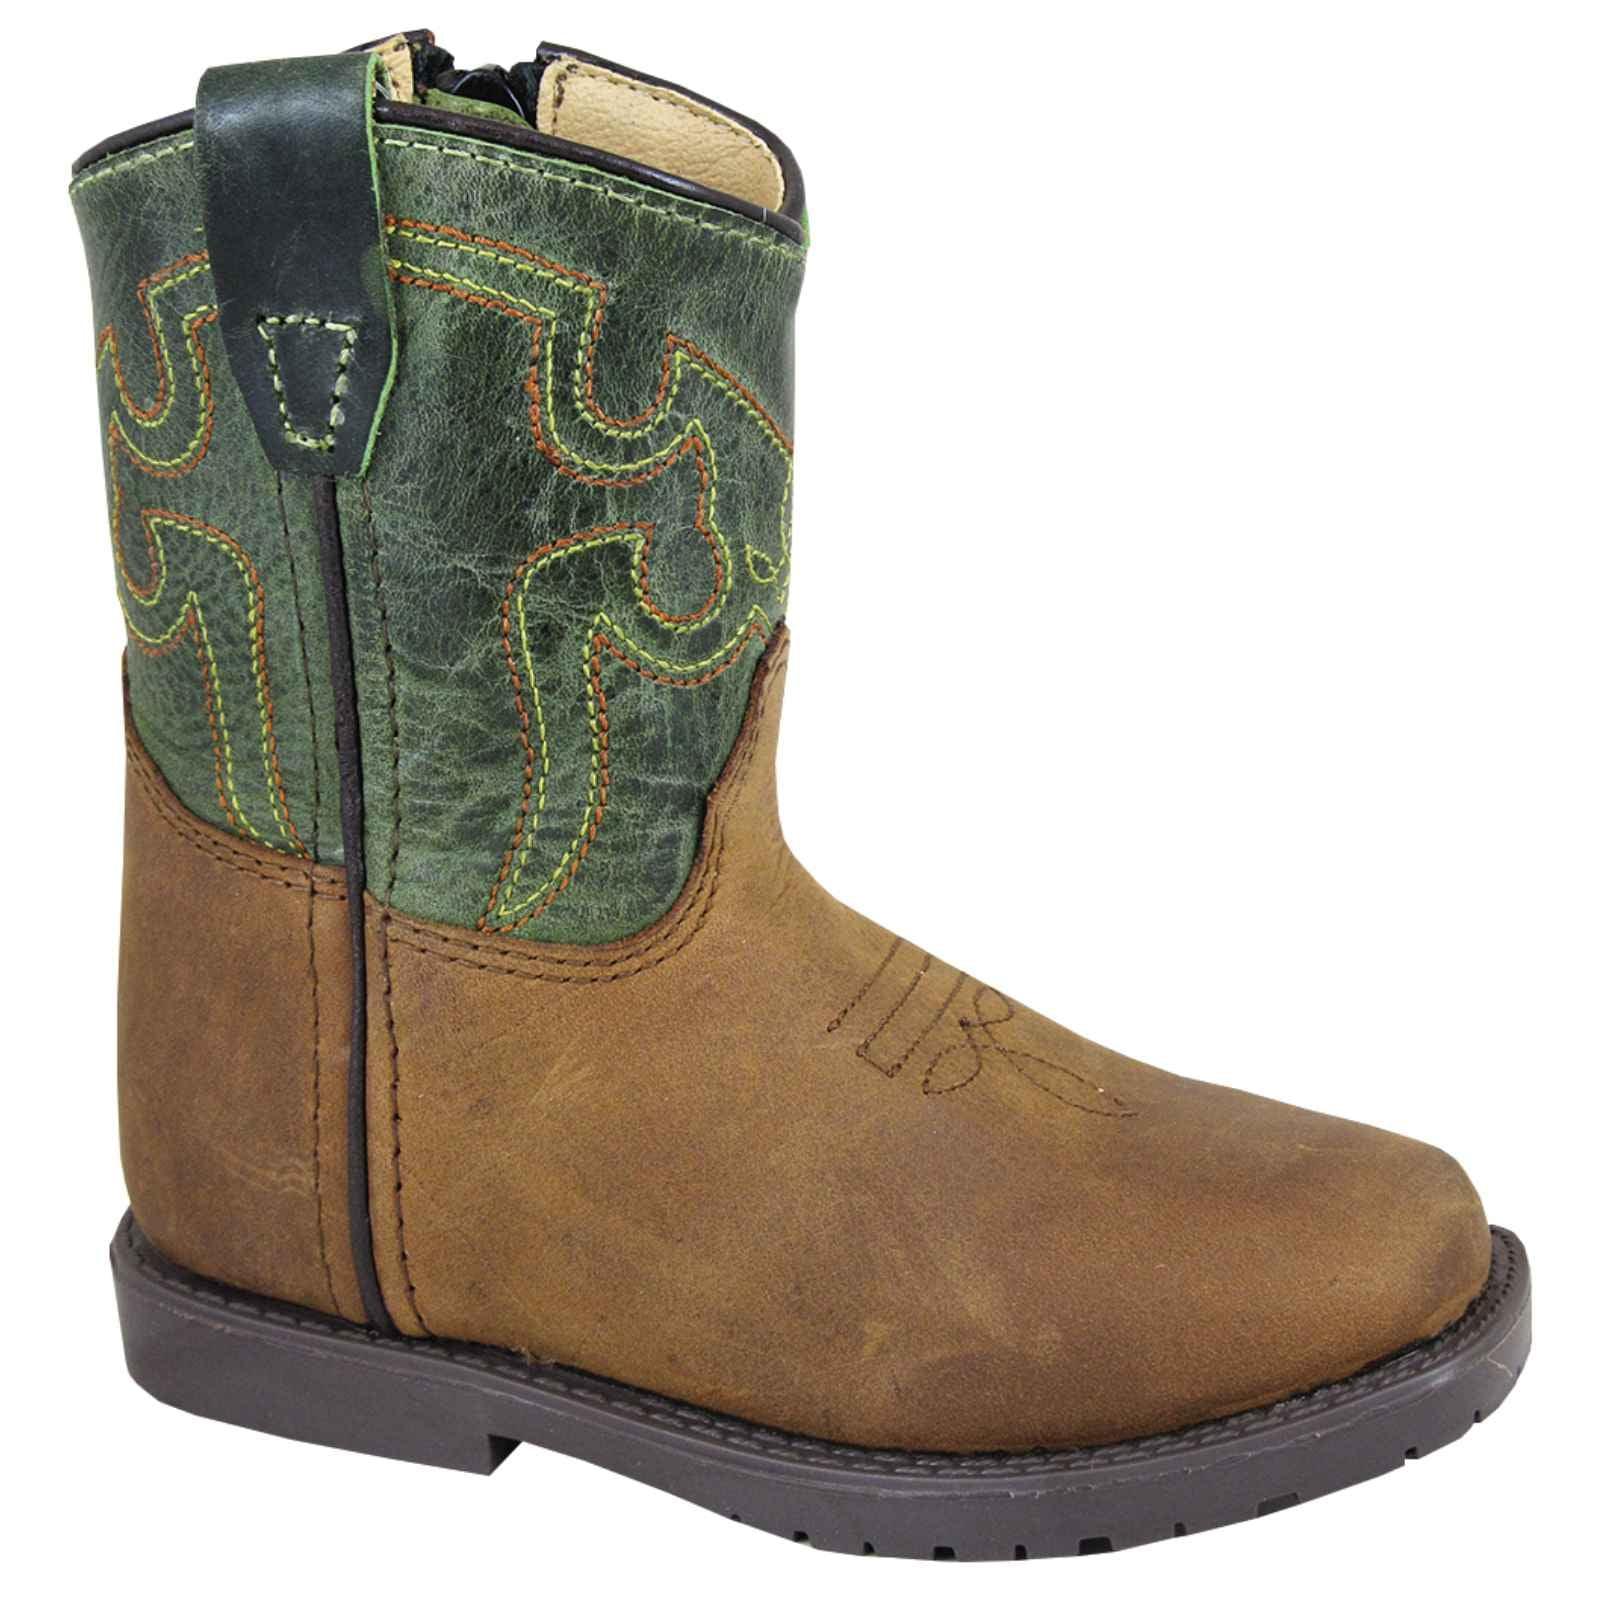 Toddler Unisex Casual Western Boot with Side Zip in Green Crackle